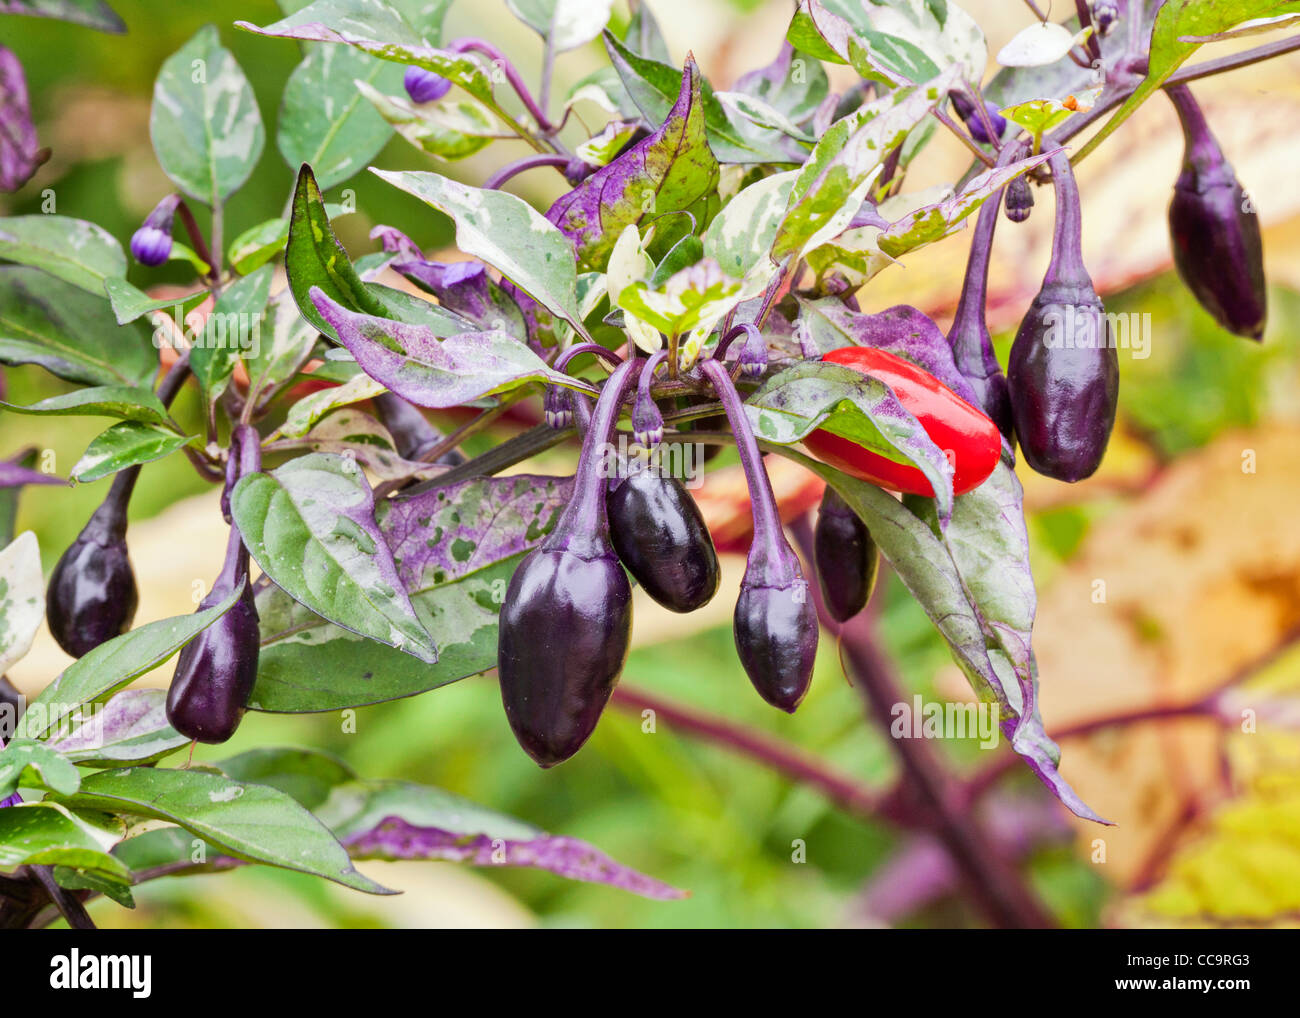 Ornamental purple and red peppers - USA Stock Photo